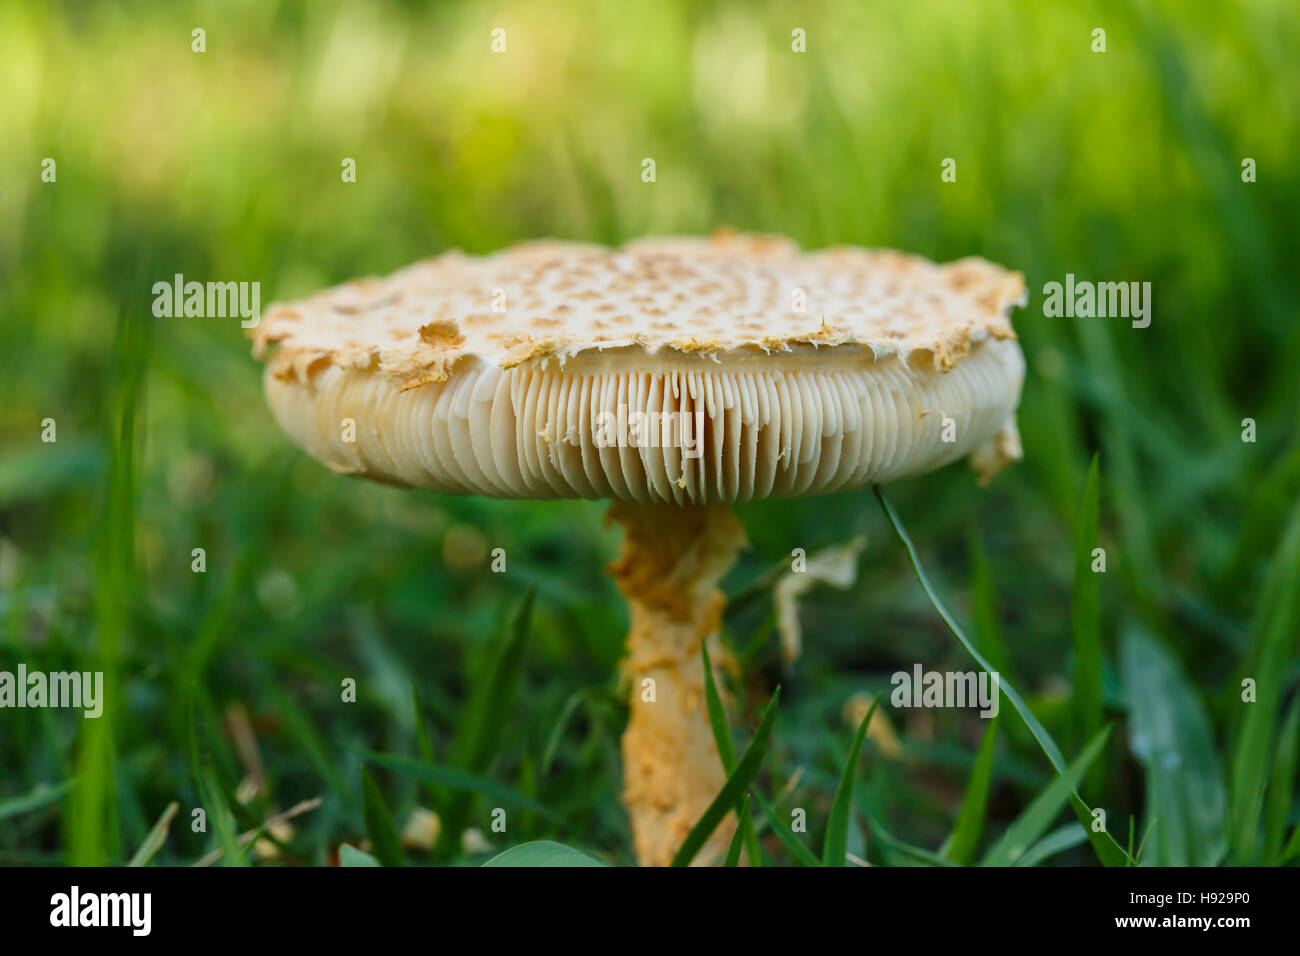 Mushroom in the tropical forests of Thailand. Stock Photo